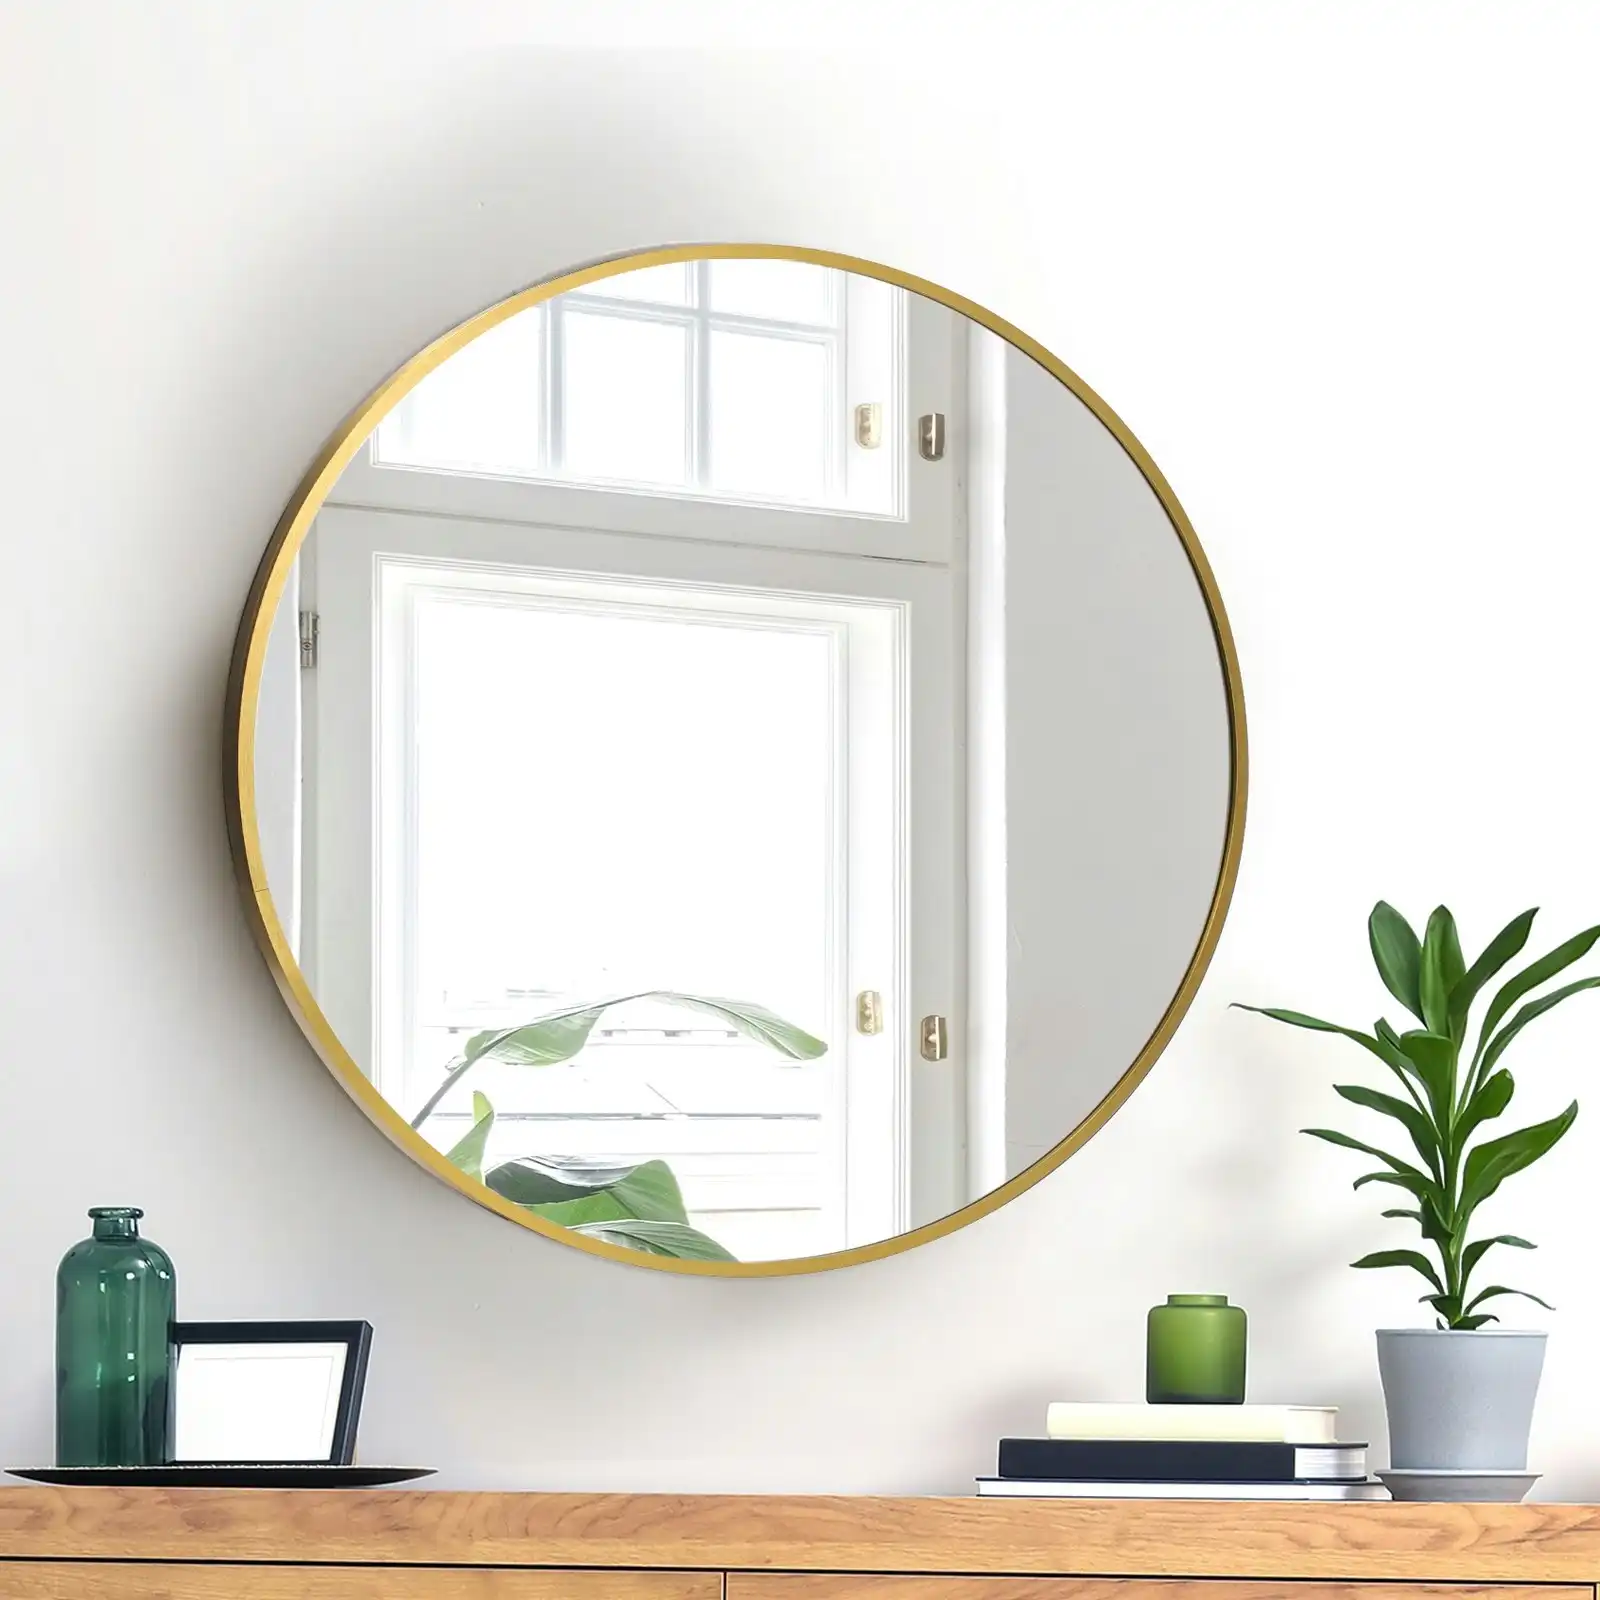 Oikiture Wall Mirrors Round Makeup Mirror Vanity Home Decro 50cm Gold Bedroom